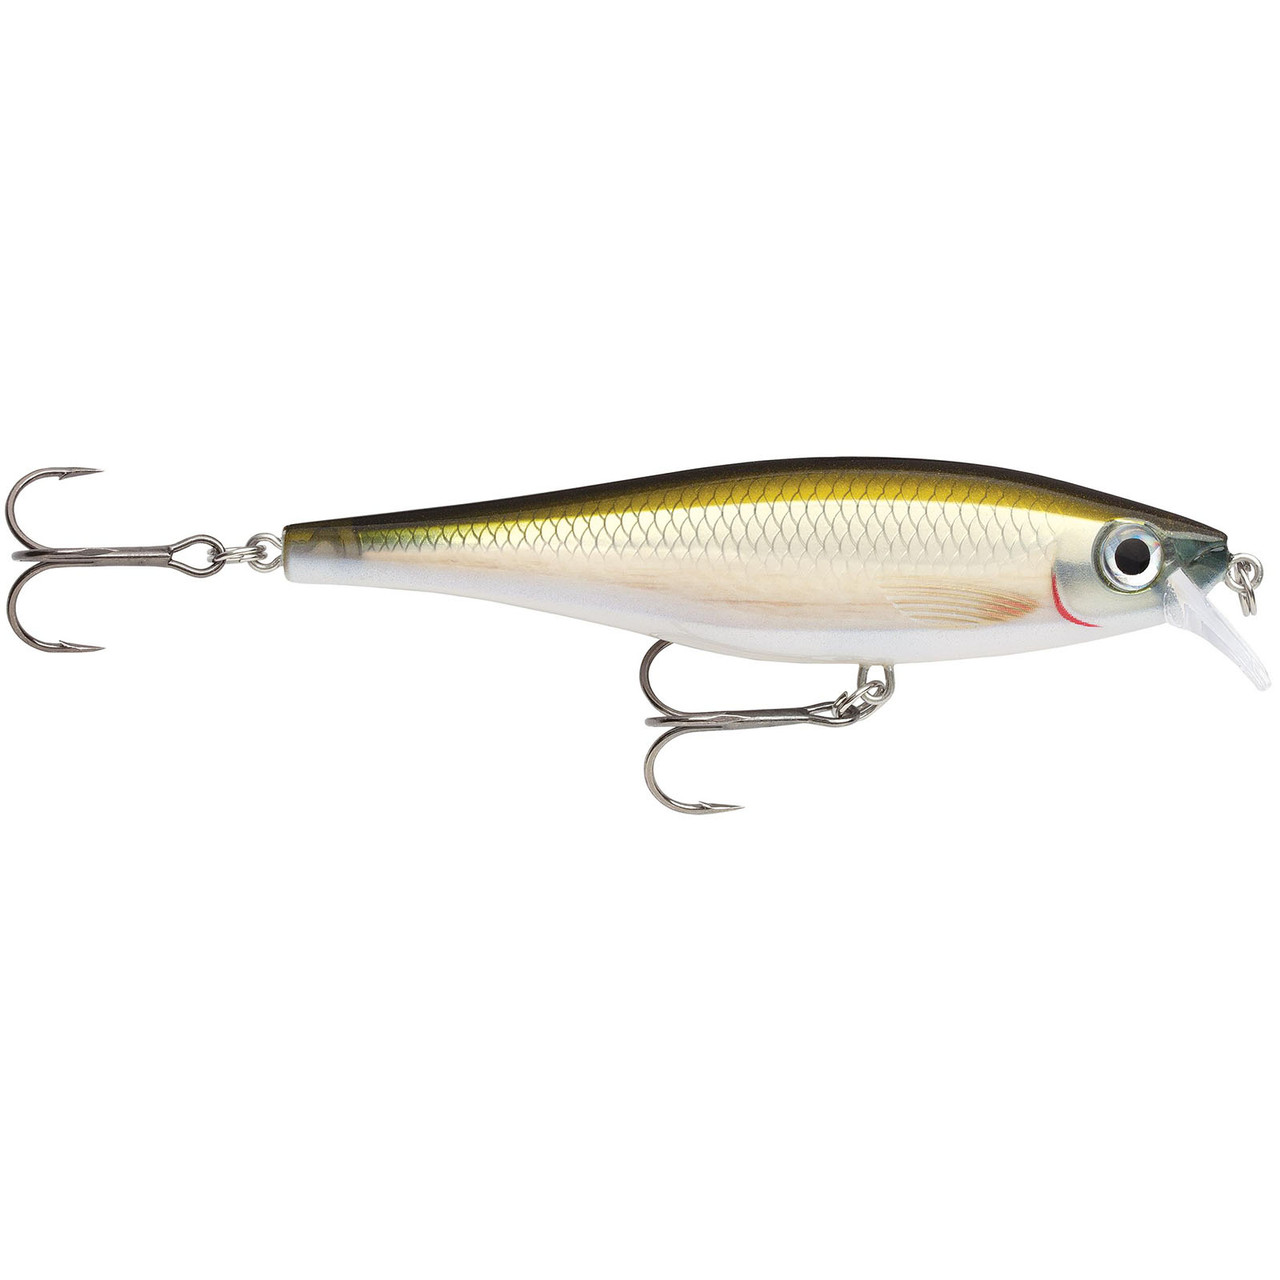  Rapala Unisex's BX Lure, Brown Trout, 10 : Sports & Outdoors